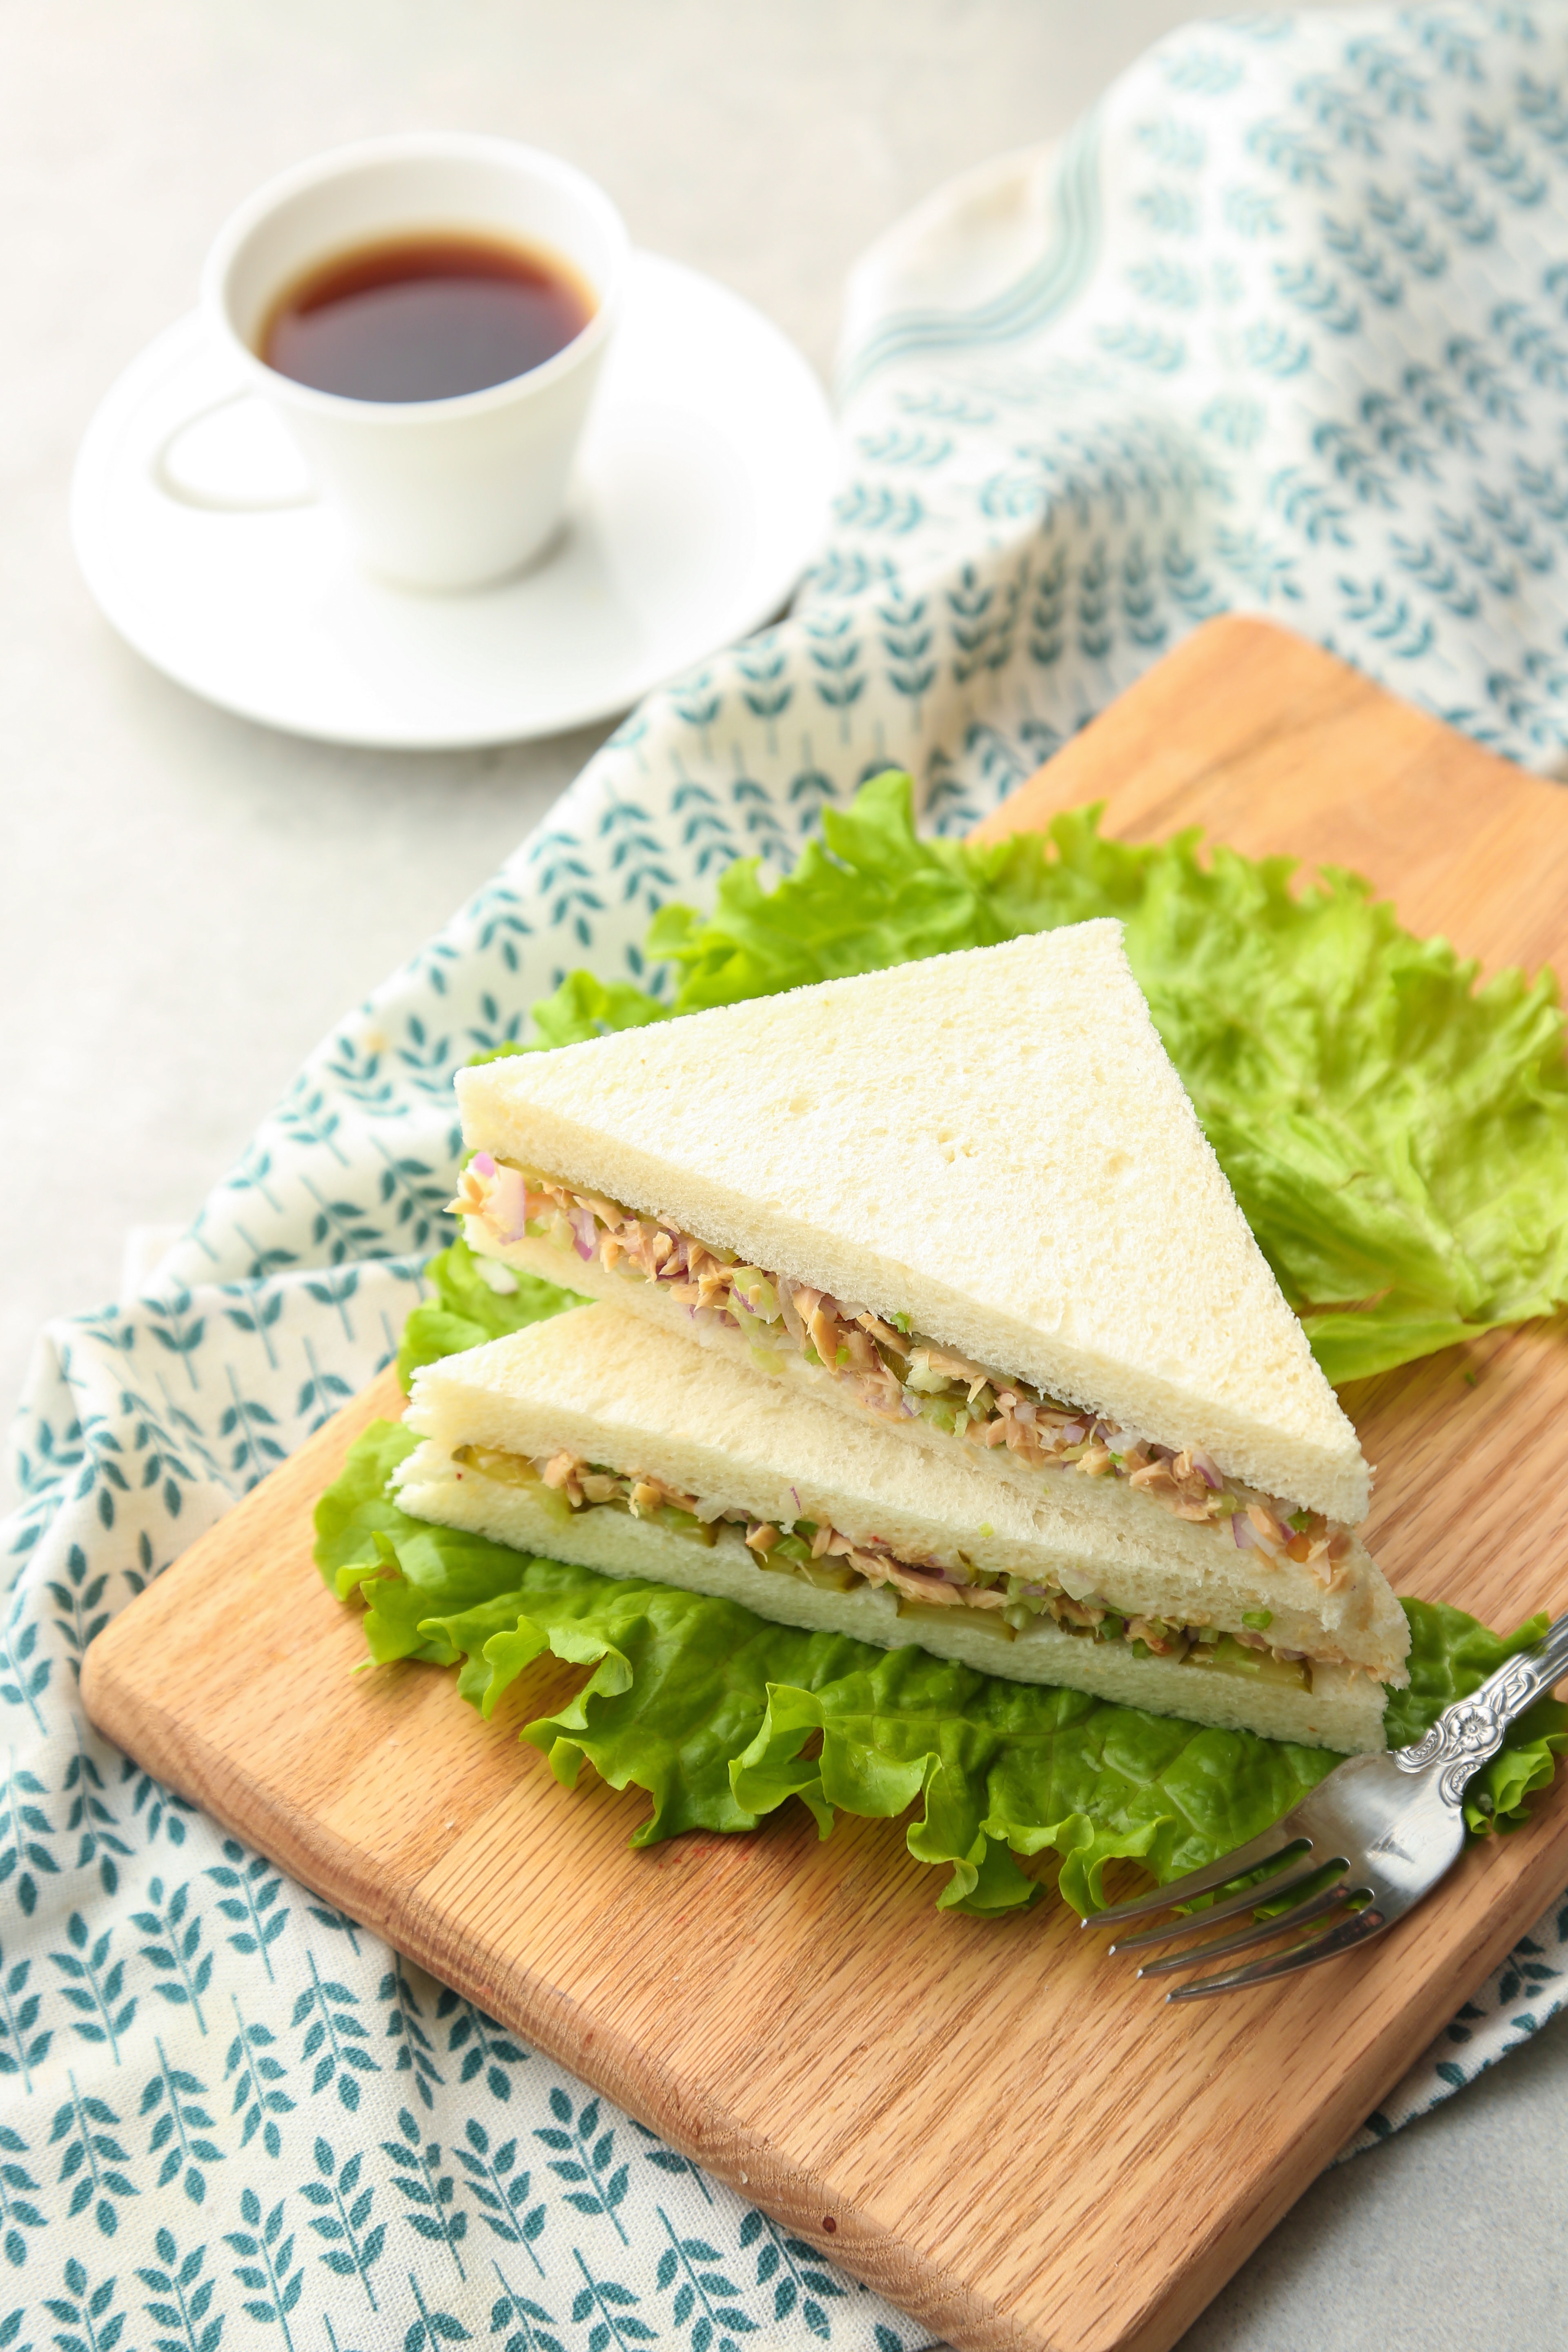 
Tuna enjoys sandwich gently, the practice of the breakfast with rich administrative levels